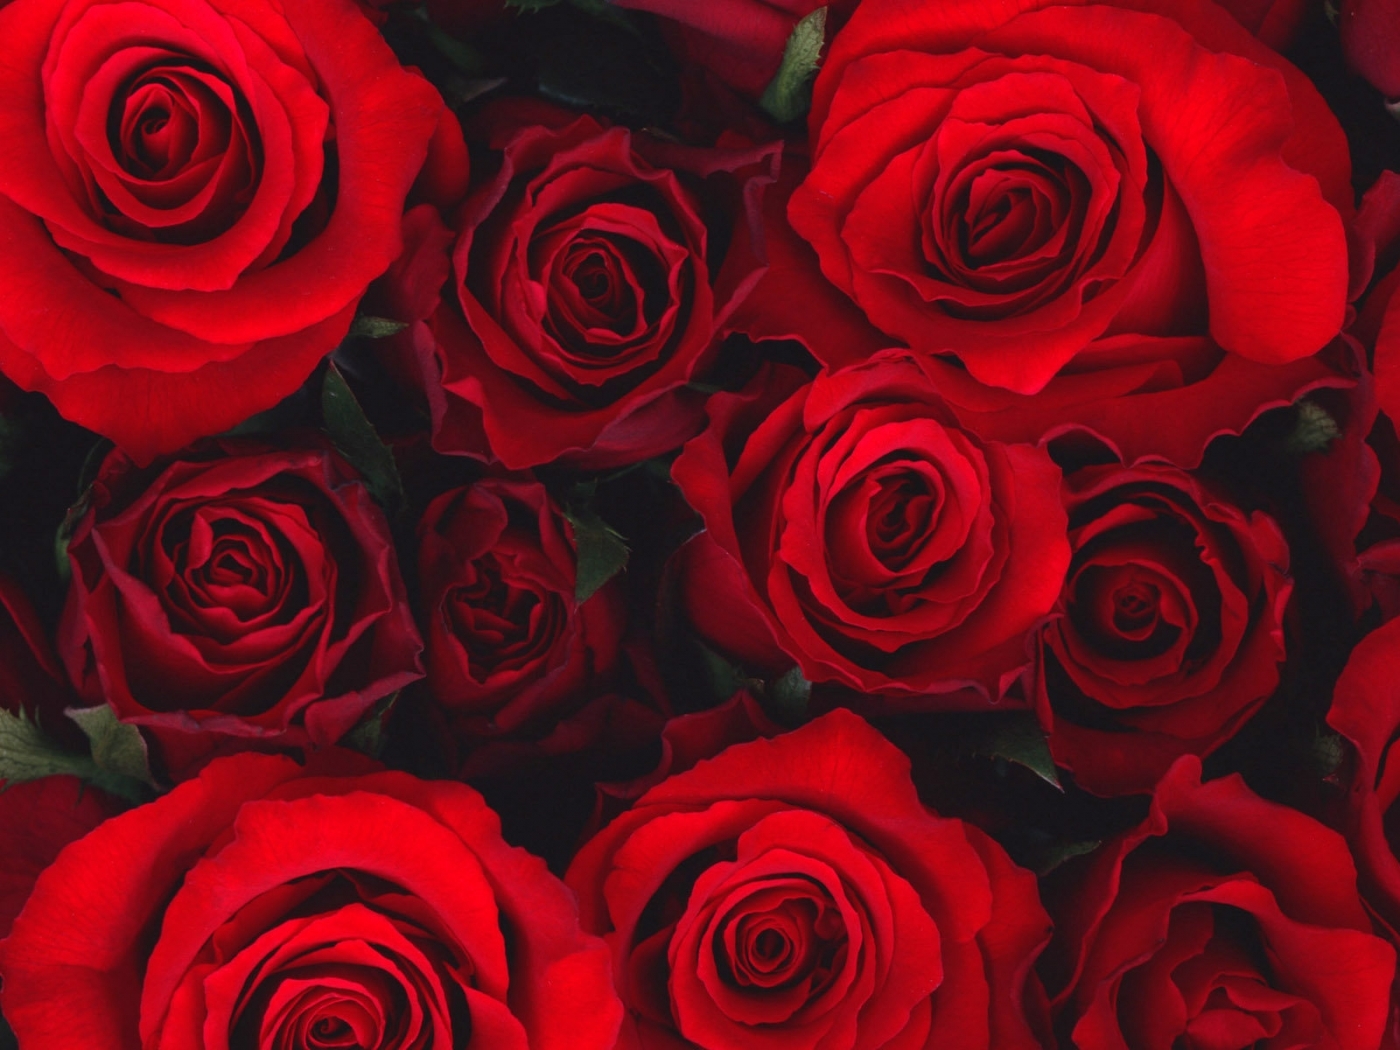 roses, flowers, pictures, red High Definition image